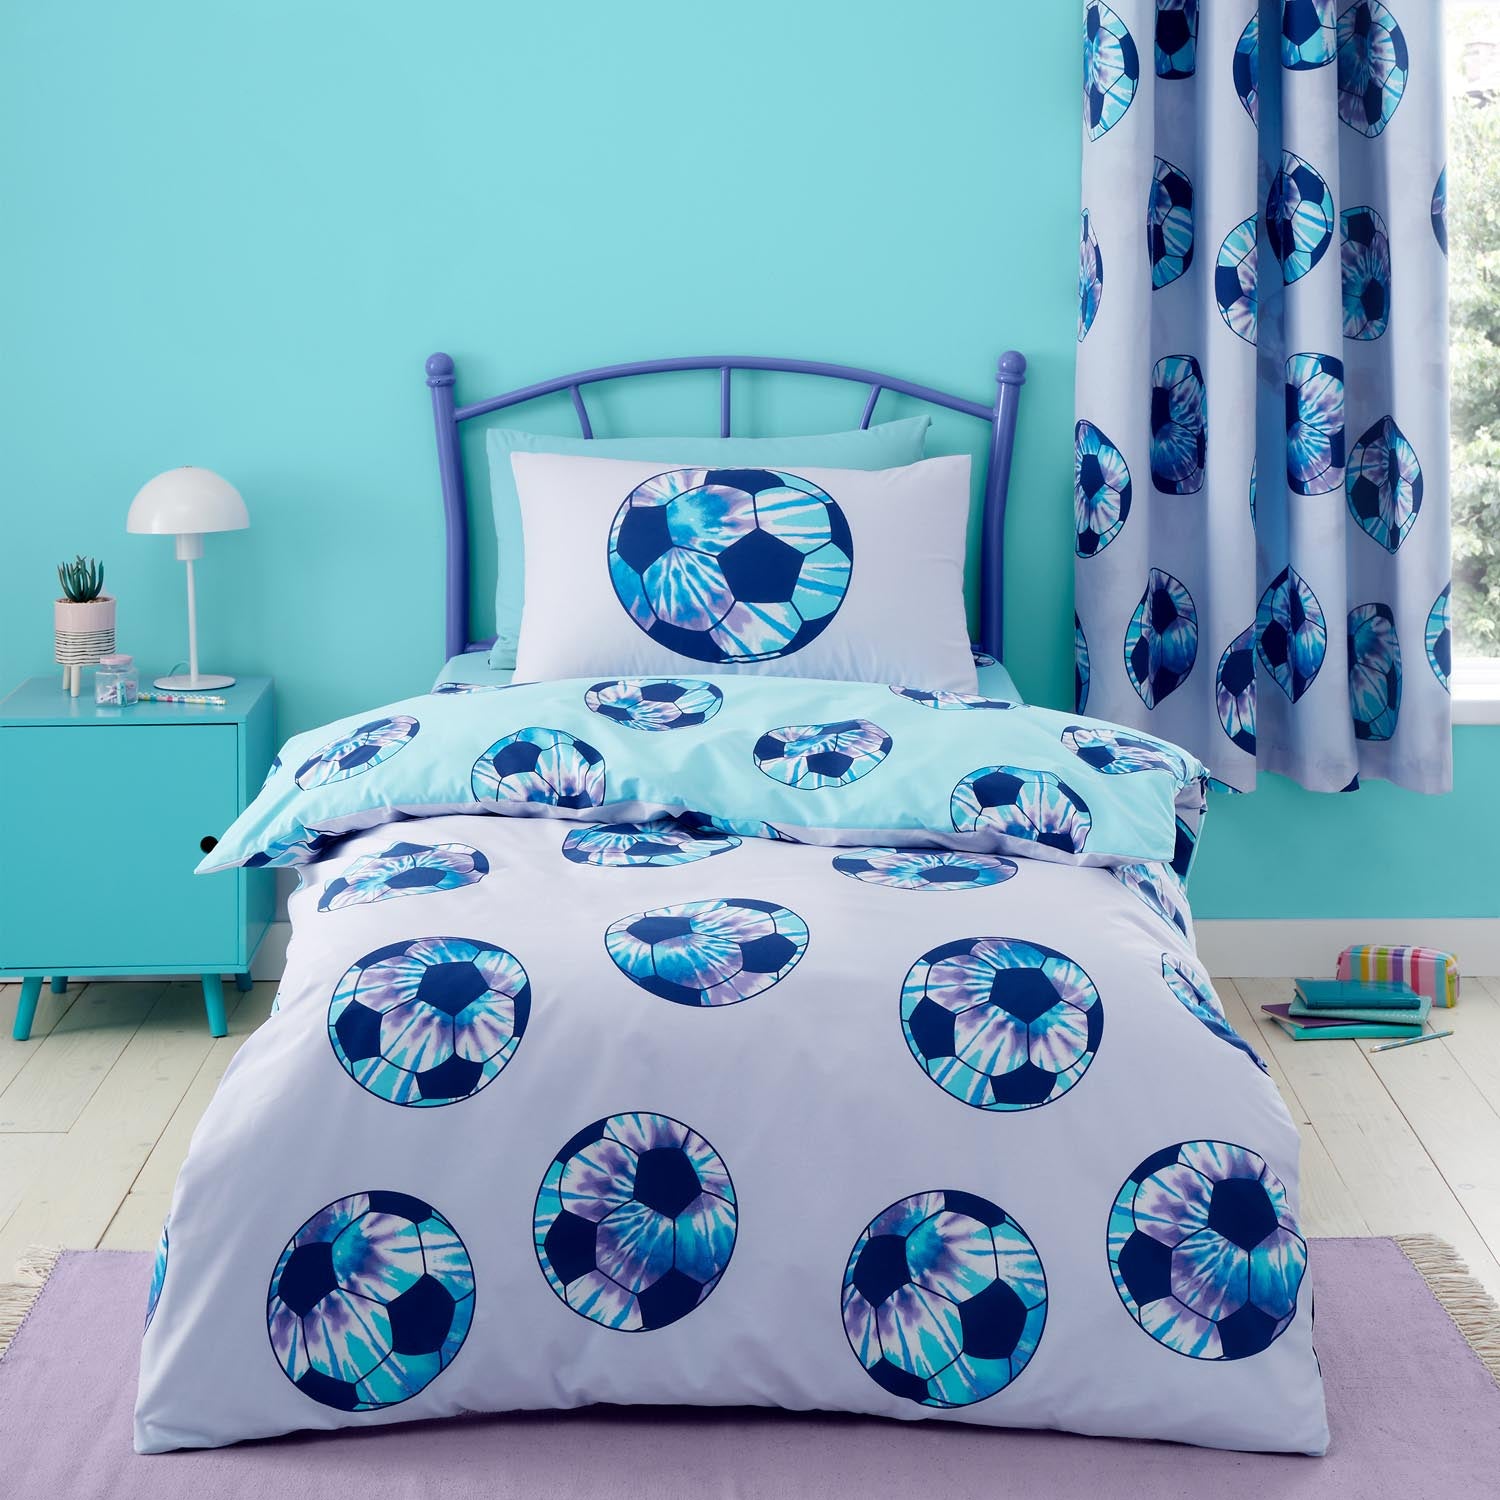 The Home Luxury Collection Tie Dye Football Duvet Cover Set 5 Shaws Department Stores